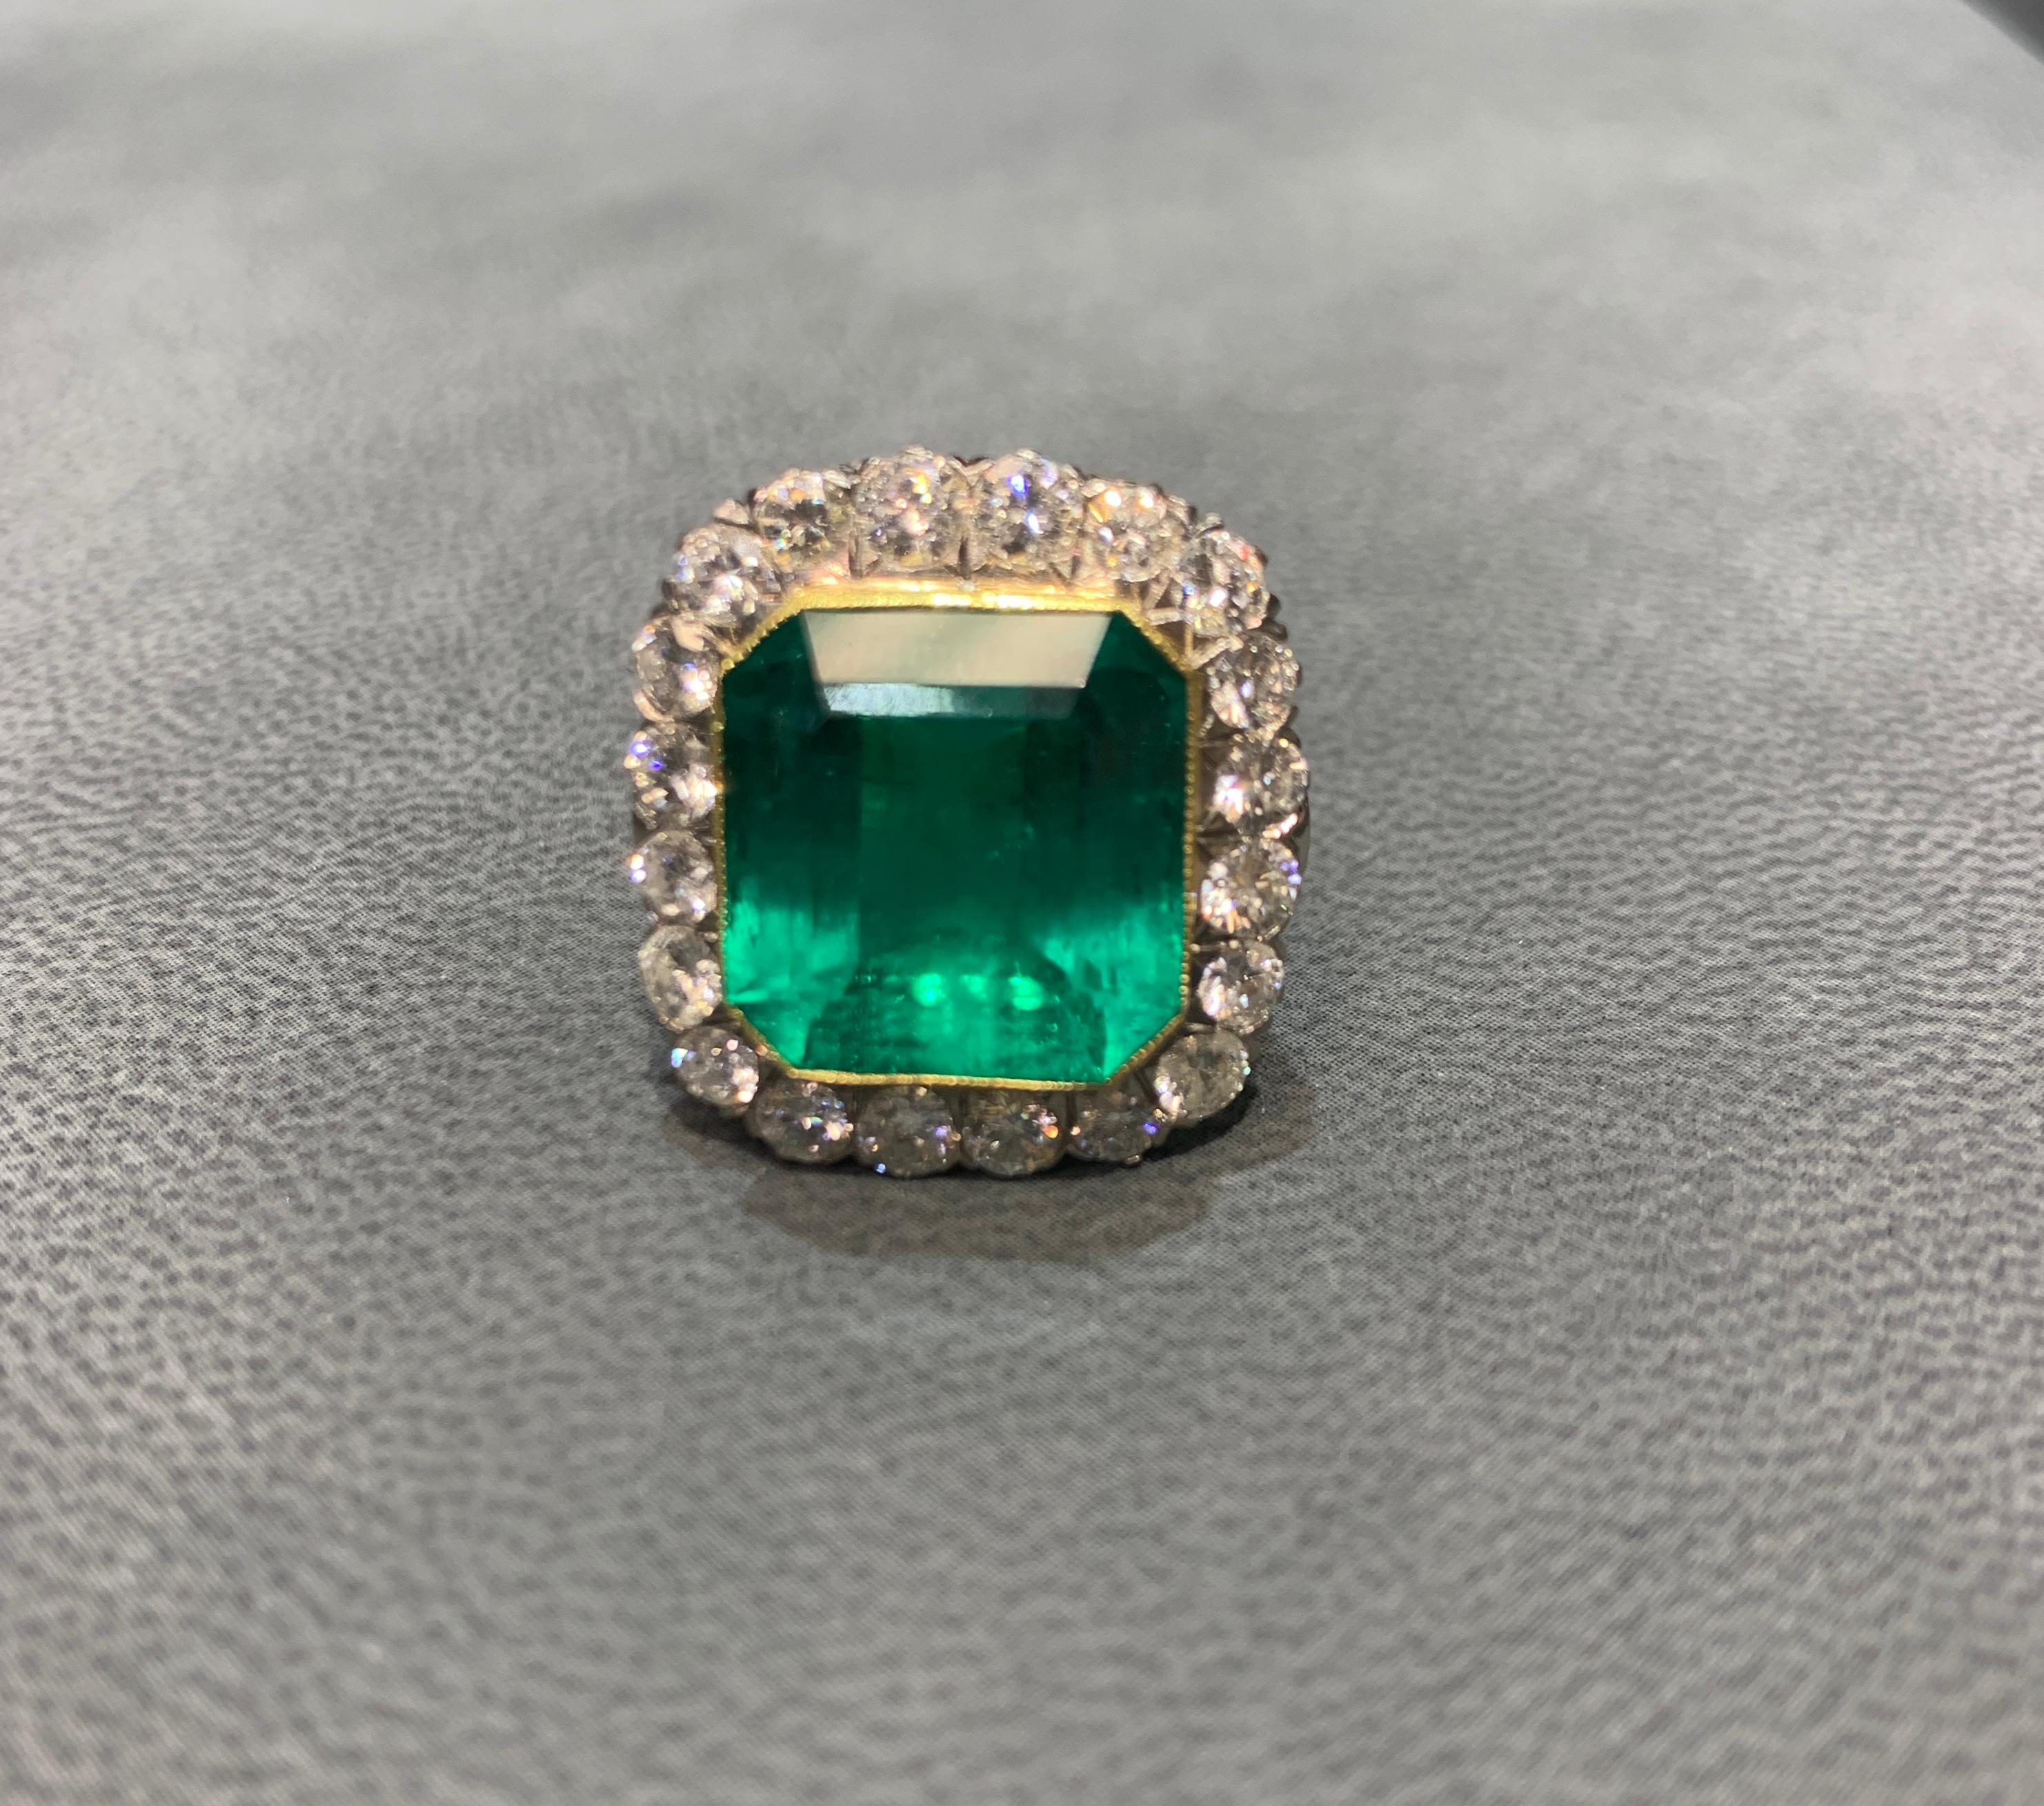  Emerald & Diamond Ring 
AGL Certified Colombian
Yellow Gold 
Emerald Weight: approx 21.00 Cts
Approx Diamond Weight: 6.16 Cts
Ring Size: 6.25
Re-sizable free of charge 